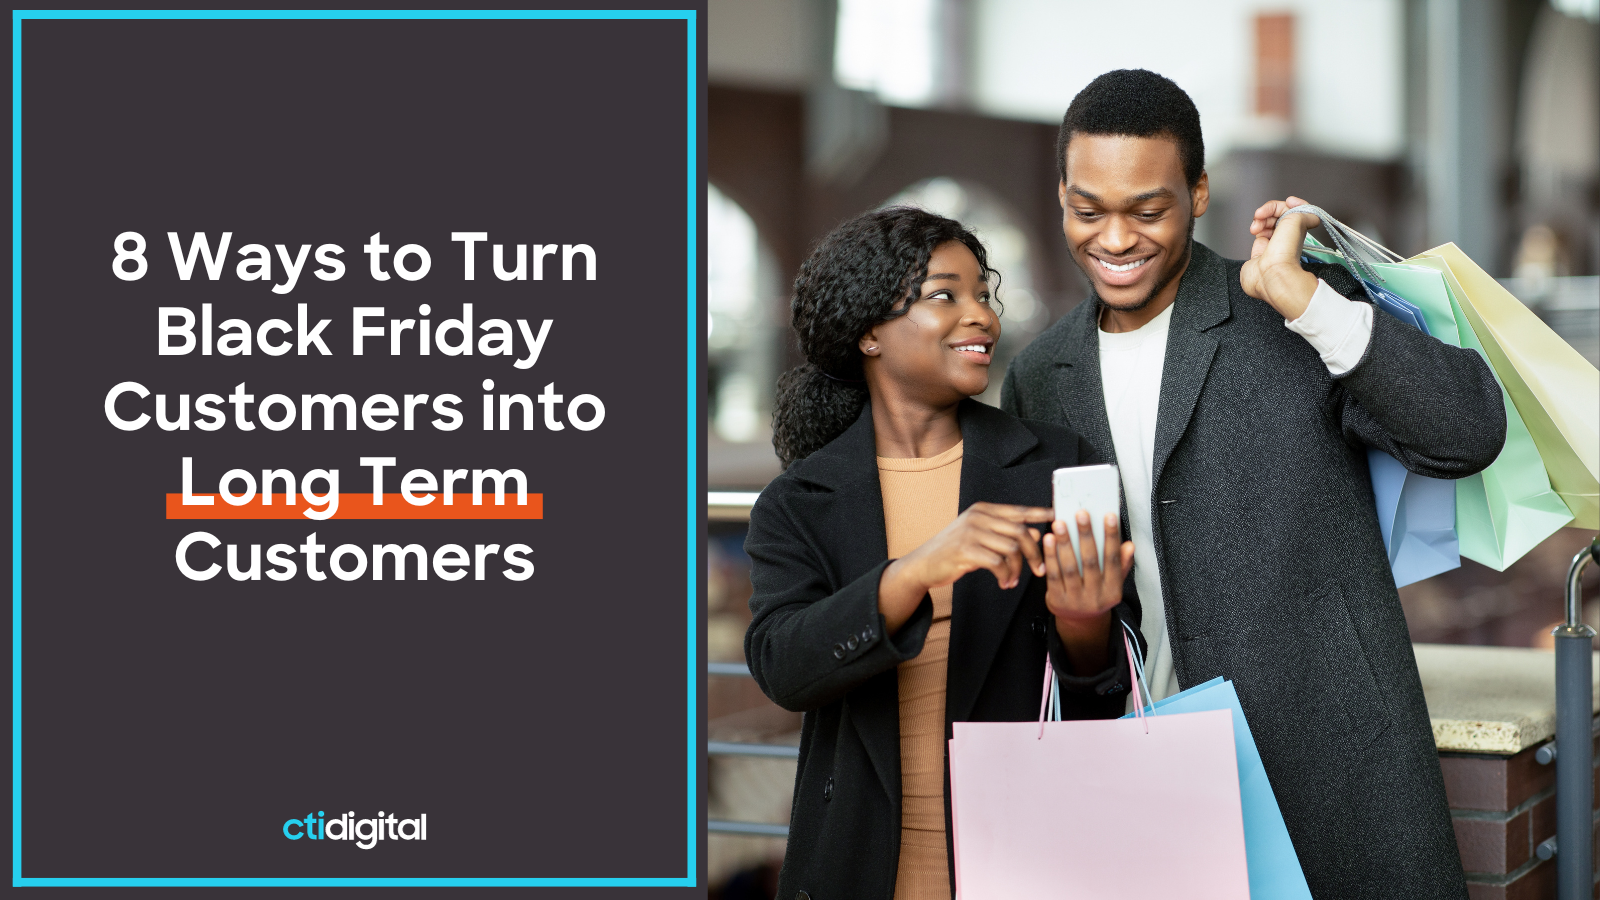 8 Ways to Turn Black Friday Customers into Long Term Customers